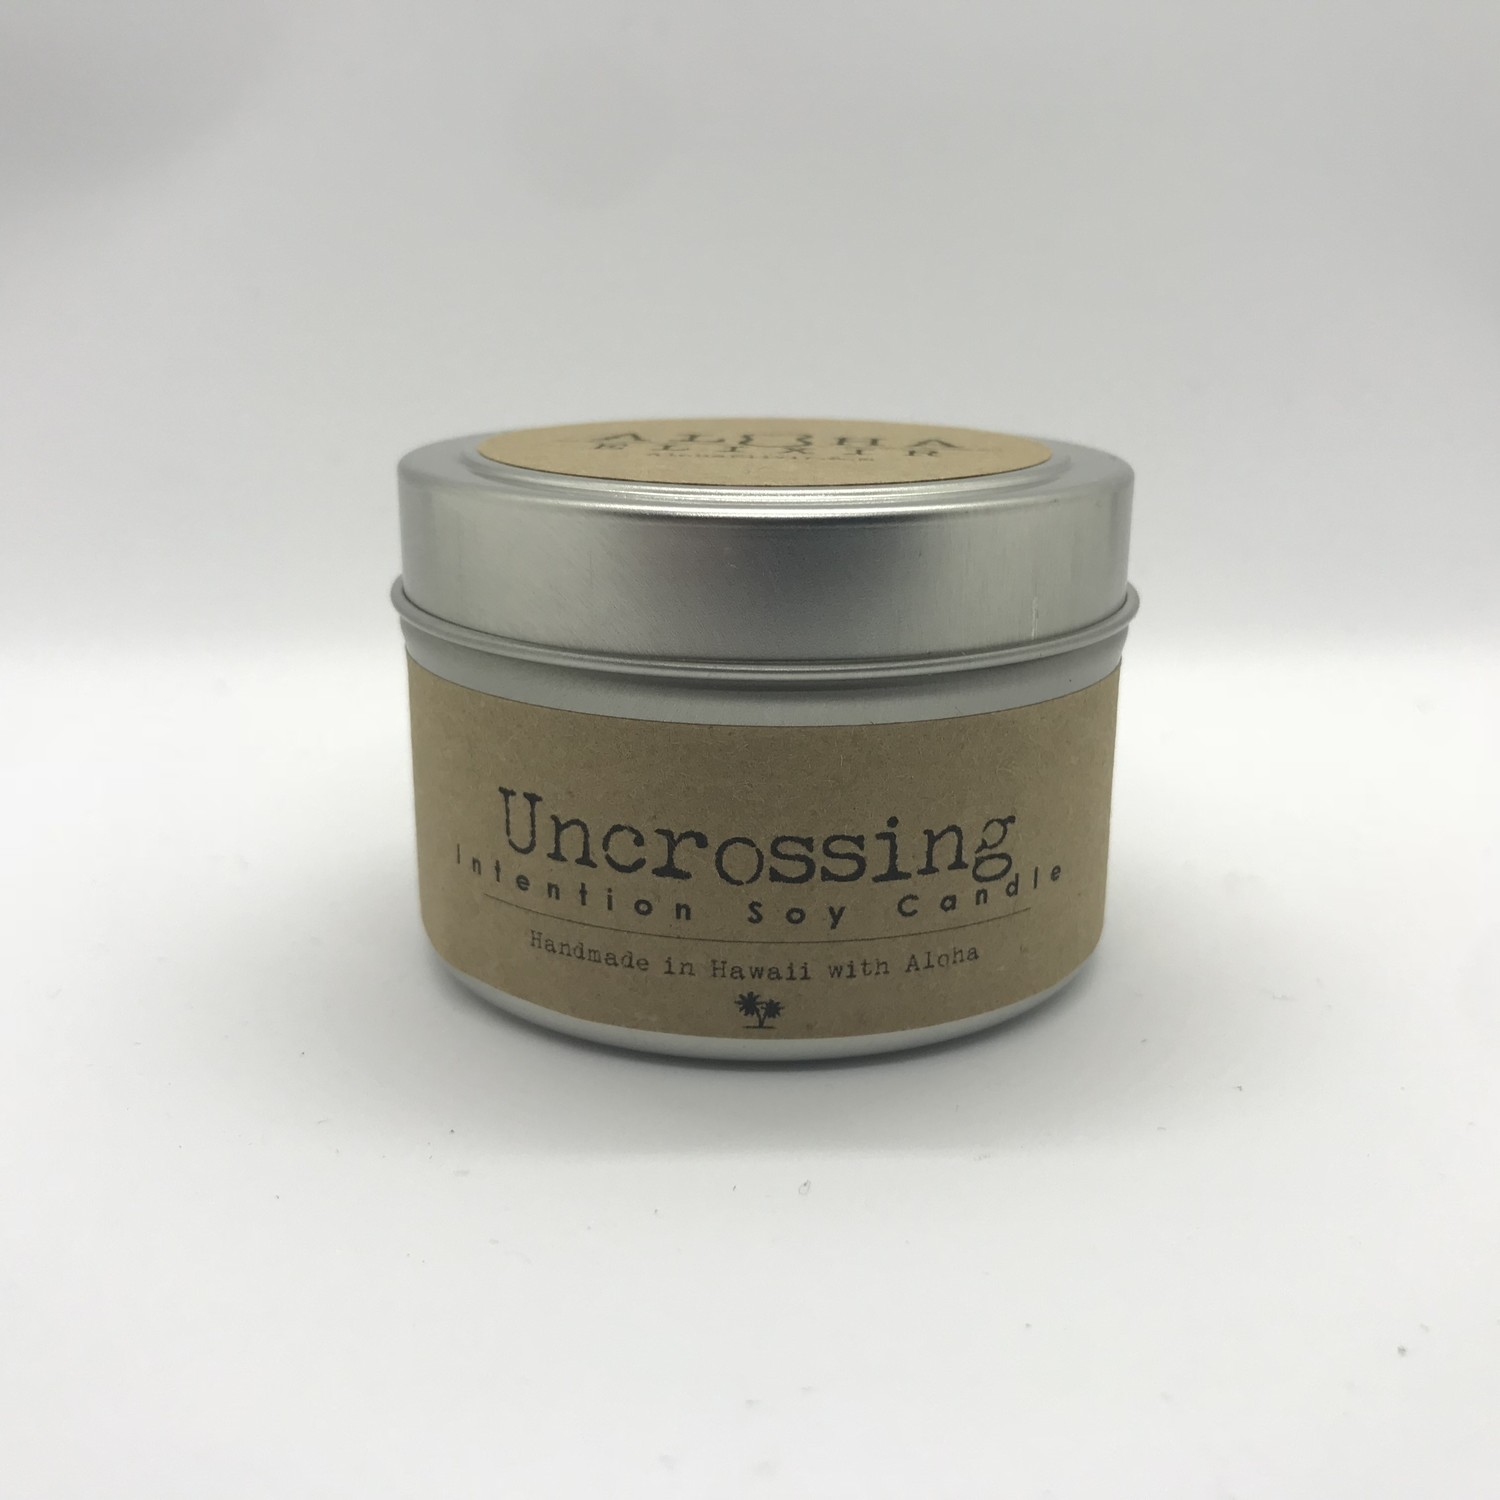 Uncrossing Soy Intention Candle